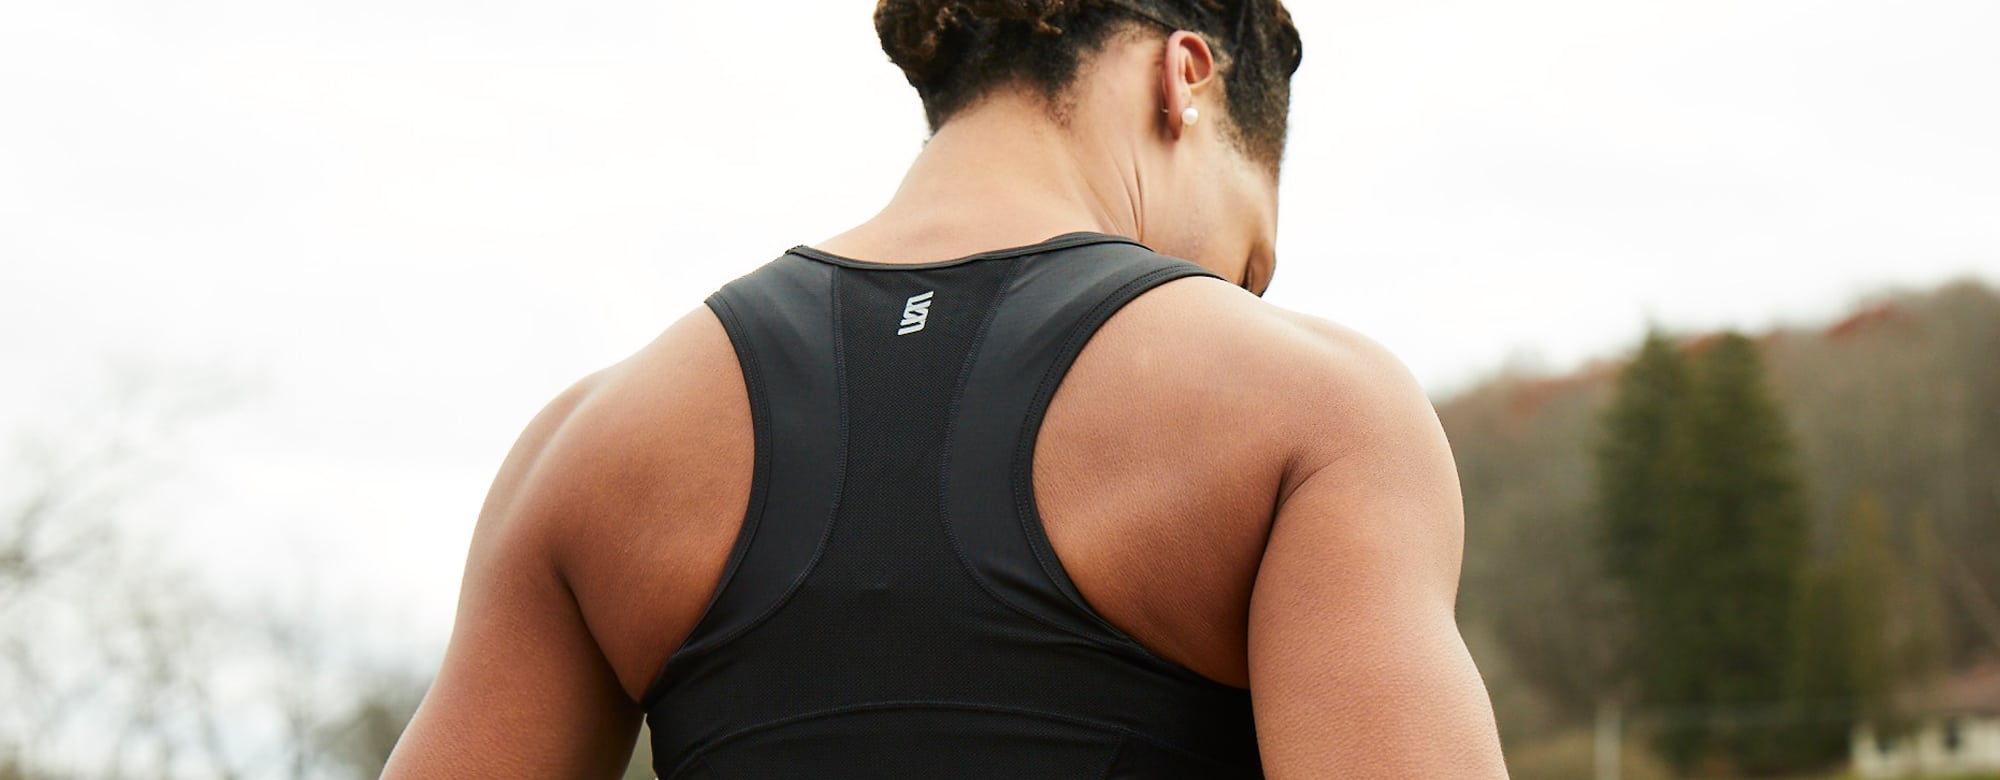 Back view of a runner athlete in tank top